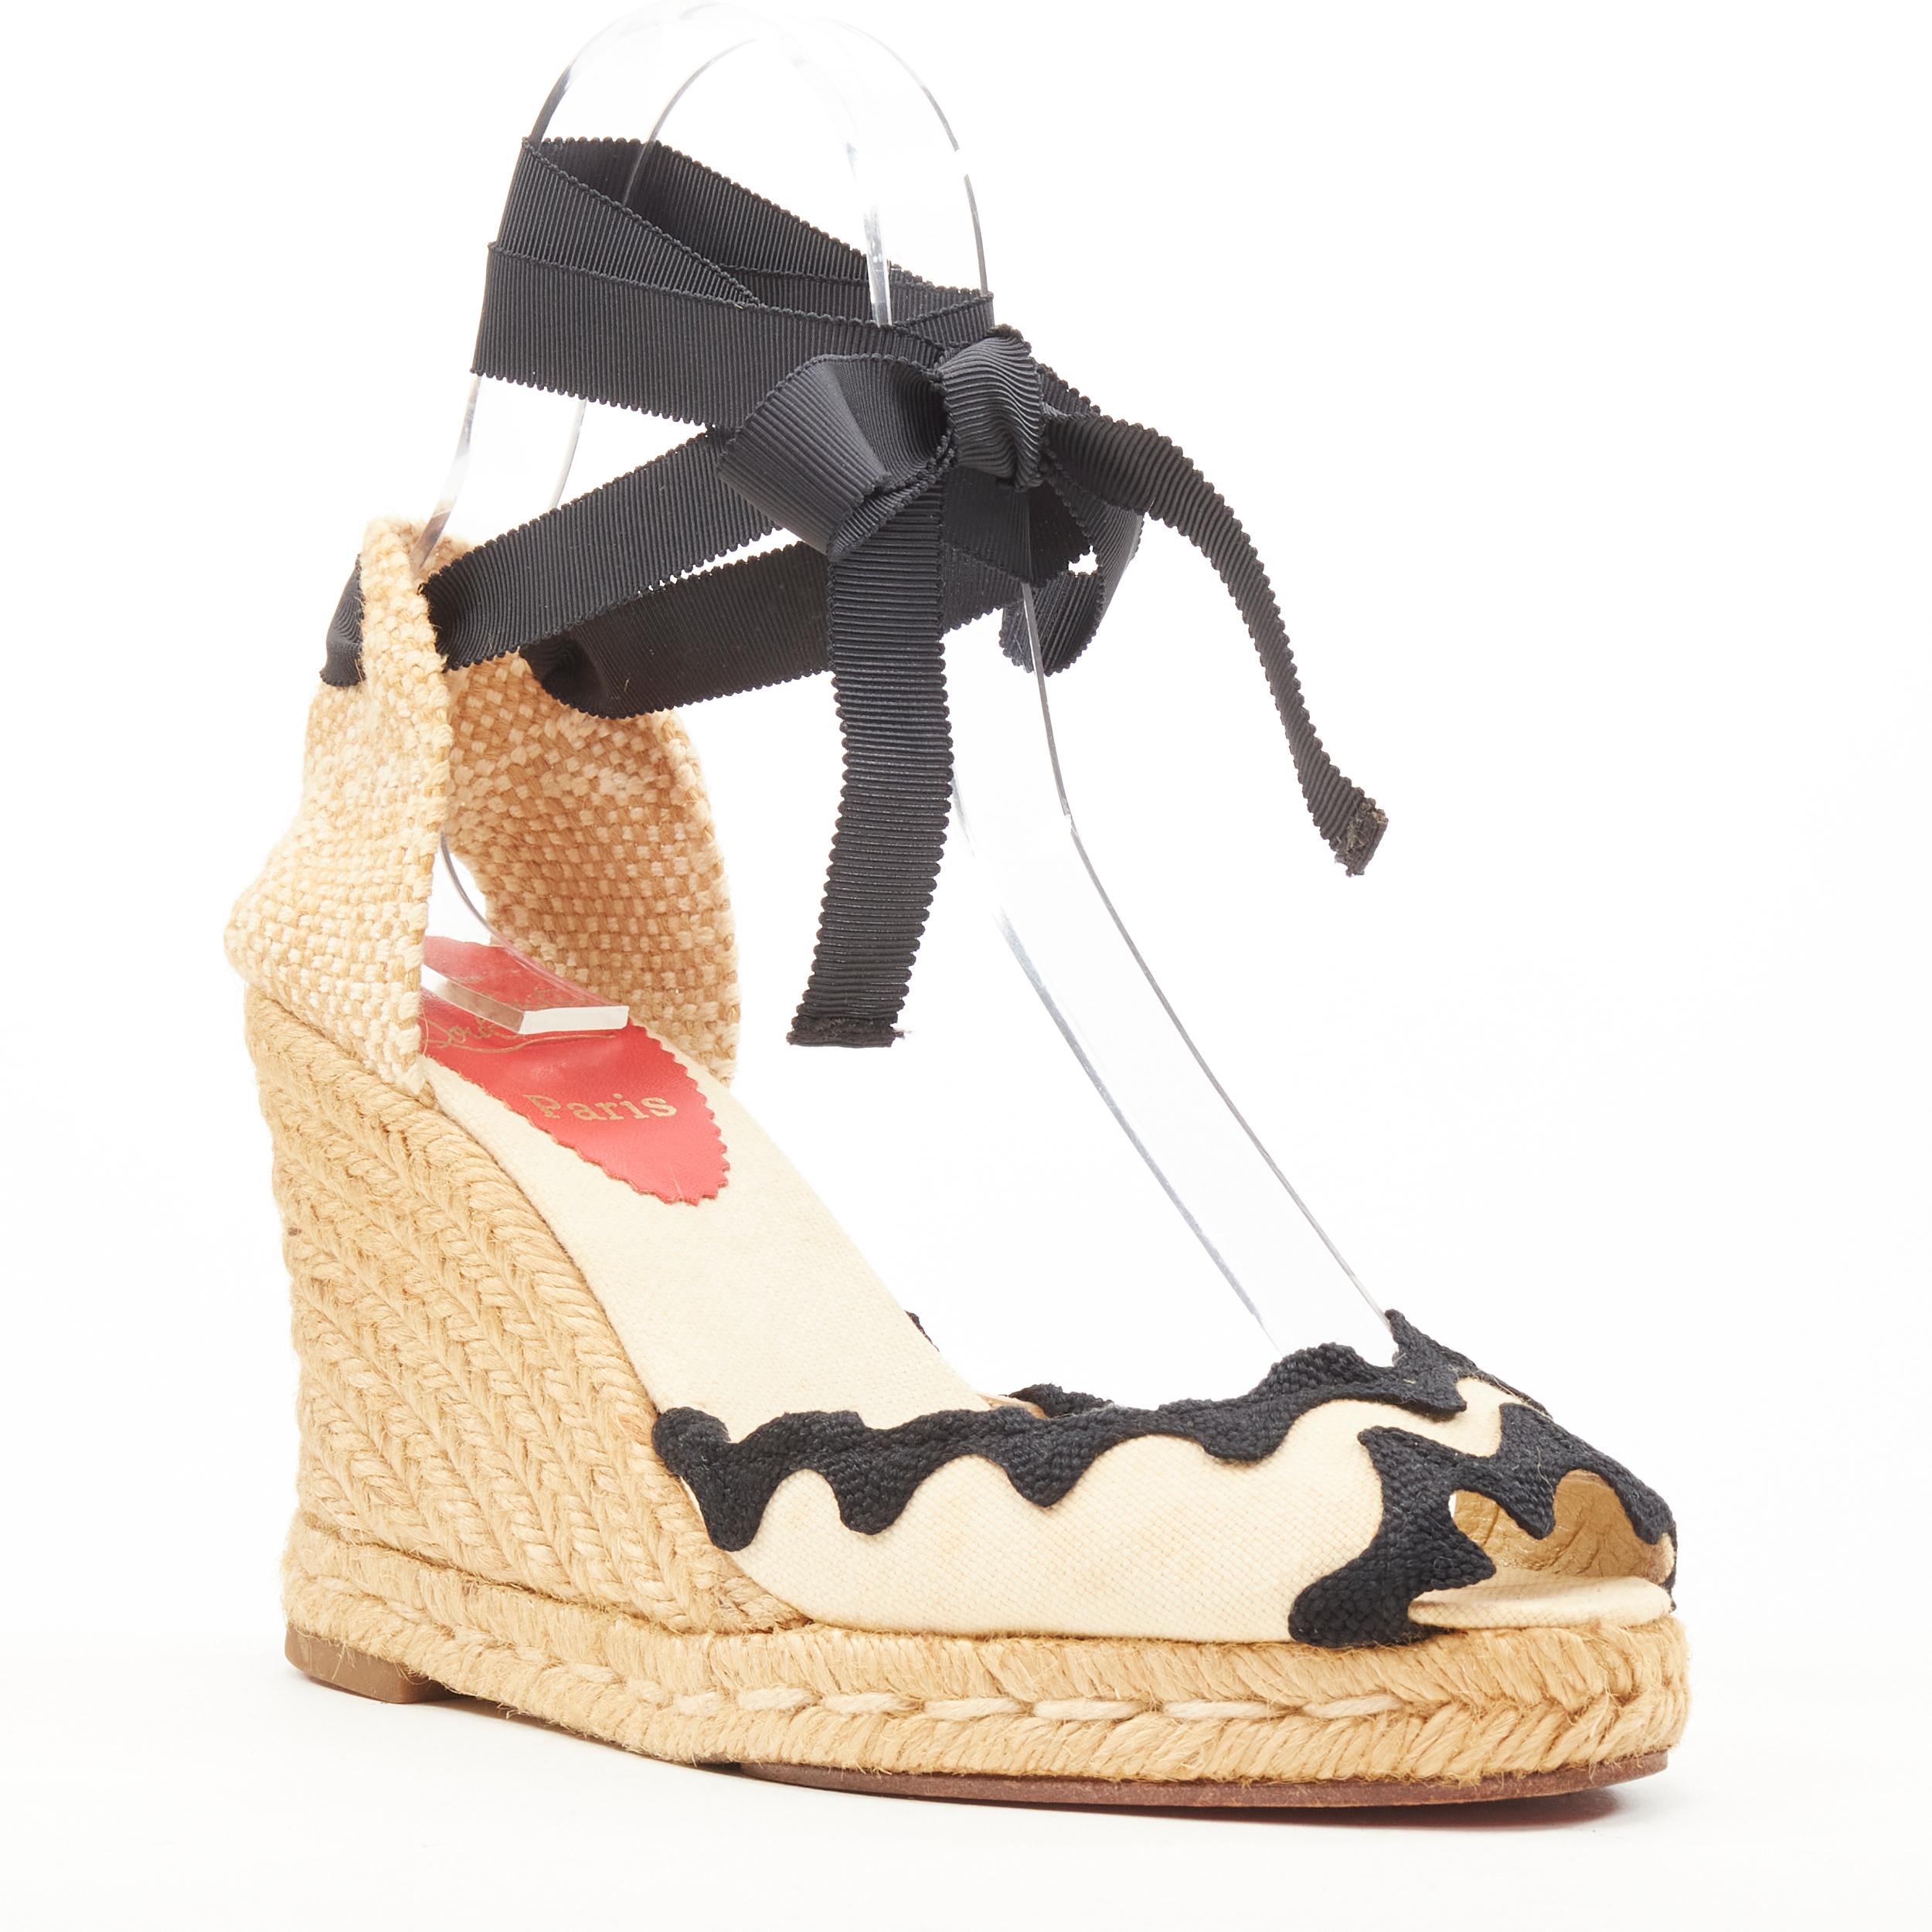 CHRISTIAN LOUBOUTIN beige canvas black scalloped espadrille wedge heel EU37 
Reference: SNKO/A00188 
Brand: Christian Louboutin 
Material: Canvas 
Color: Beige 
Pattern: Solid 
Closure: Ribbon tie 
Extra Detail: Brown canvas upper. Woven heel.